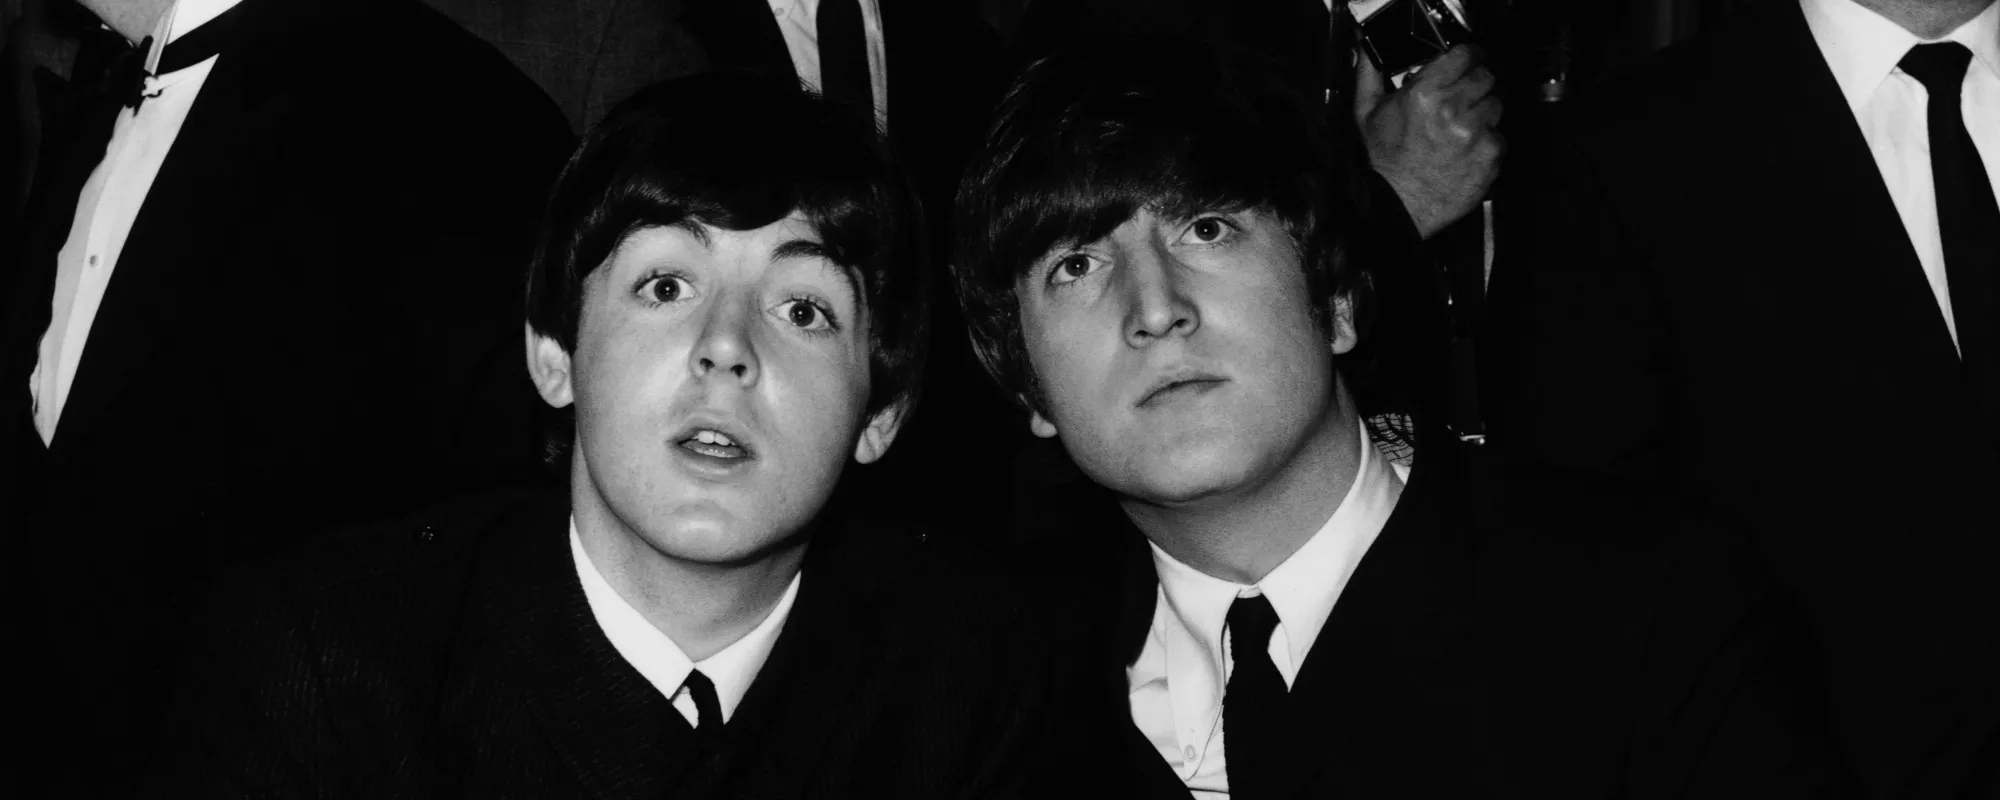 6 Songs You Didn’t Know John Lennon and Paul McCartney Wrote for Other Artists